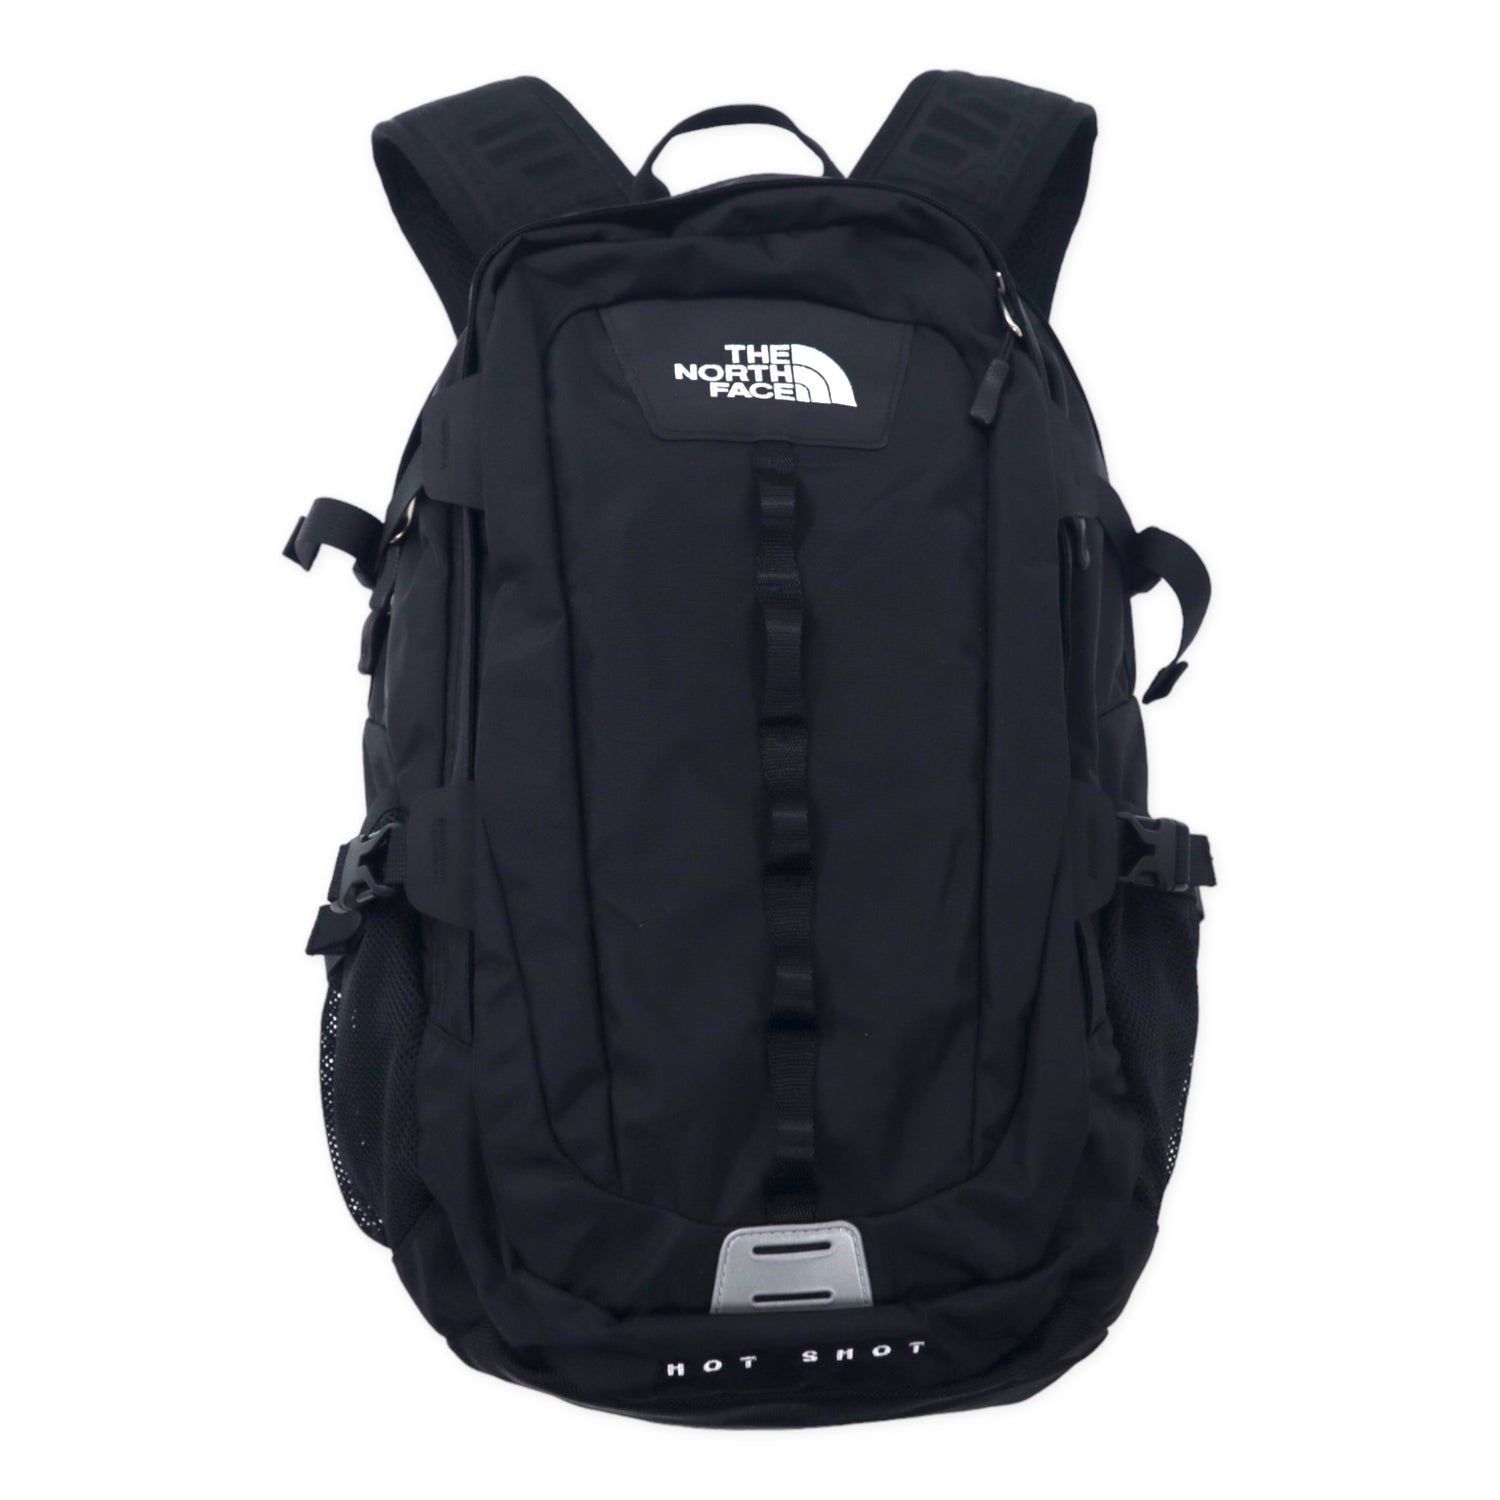 THE NORTH FACE HOT SHOT BACKPACK